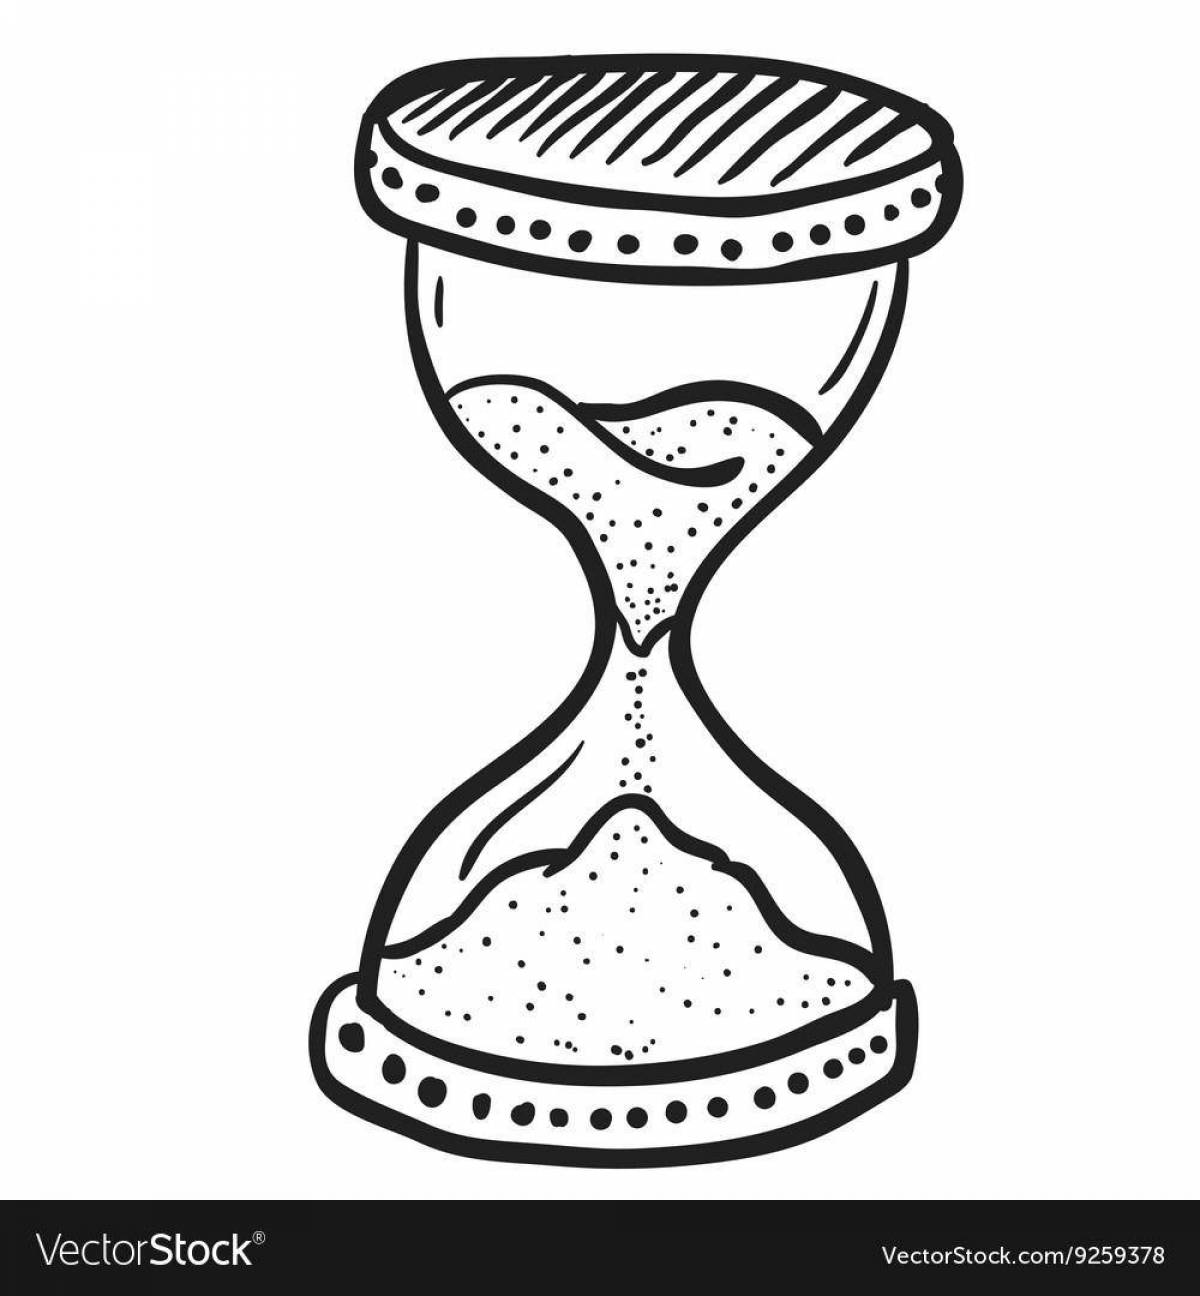 Generous hourglass coloring page